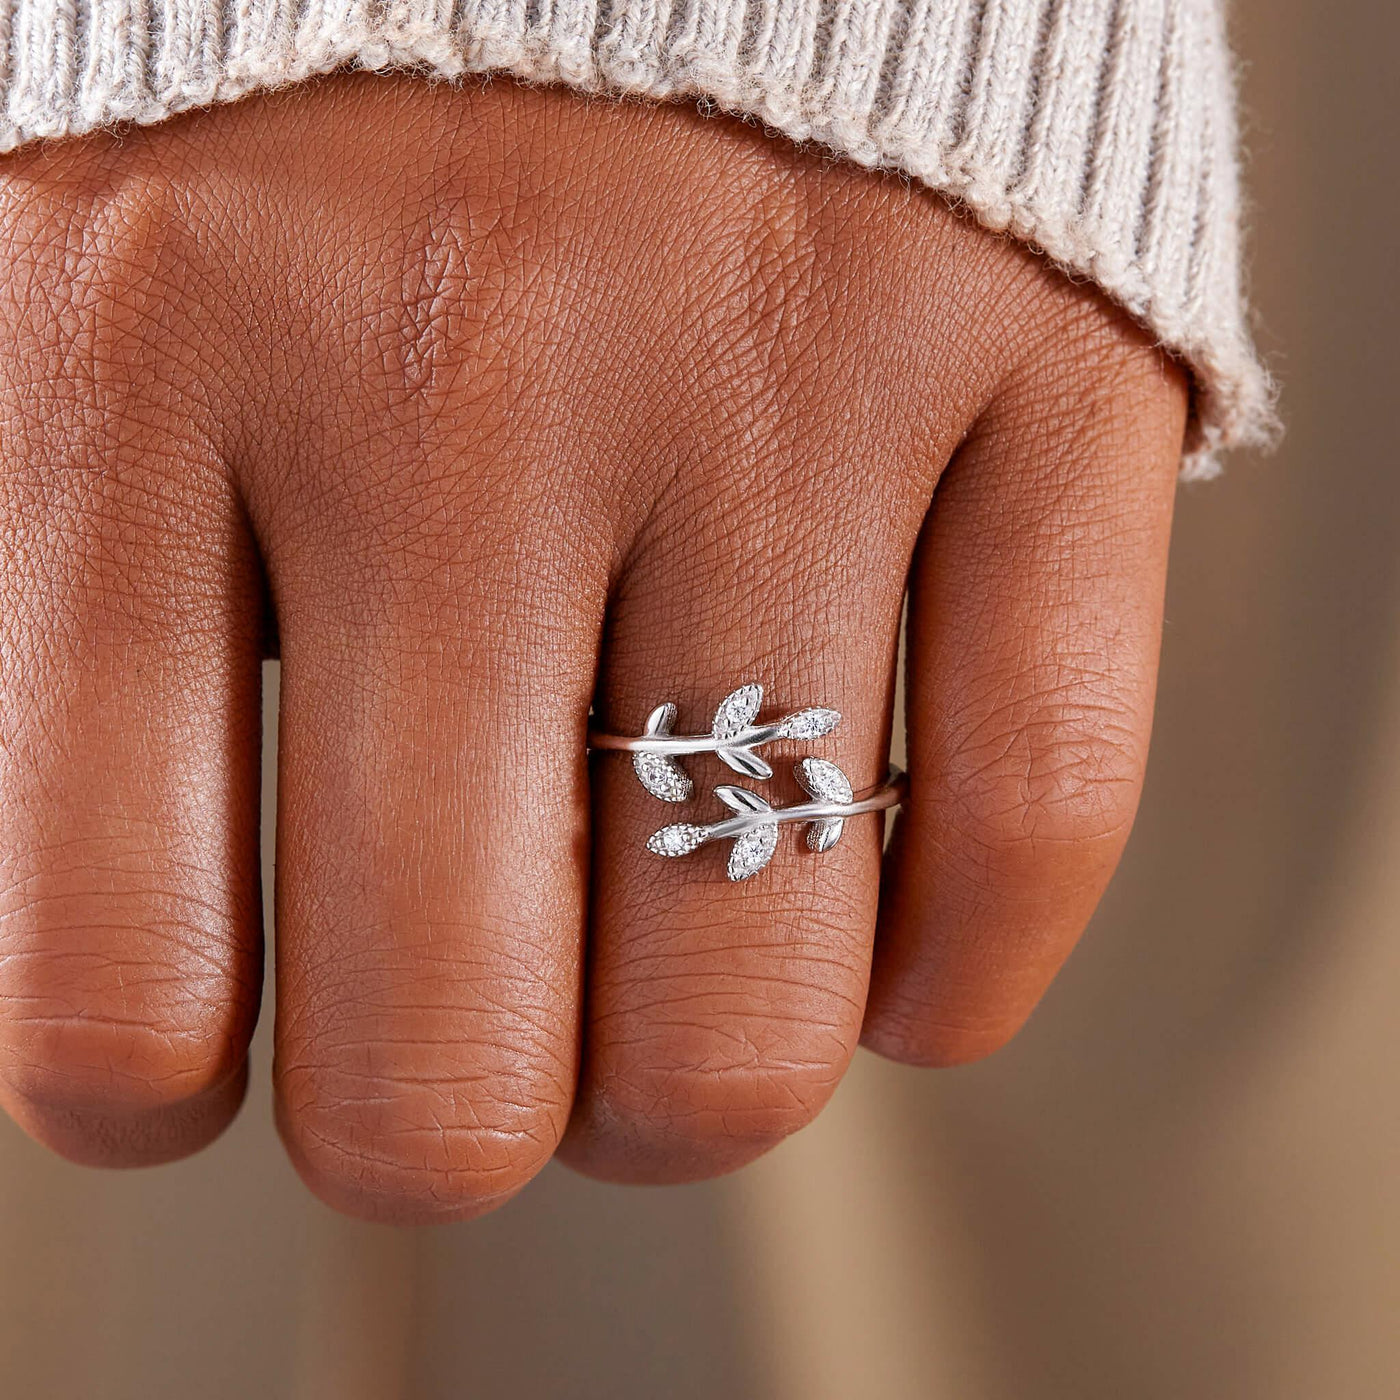 BE-LEAF IN YOURSELF LEAF RING